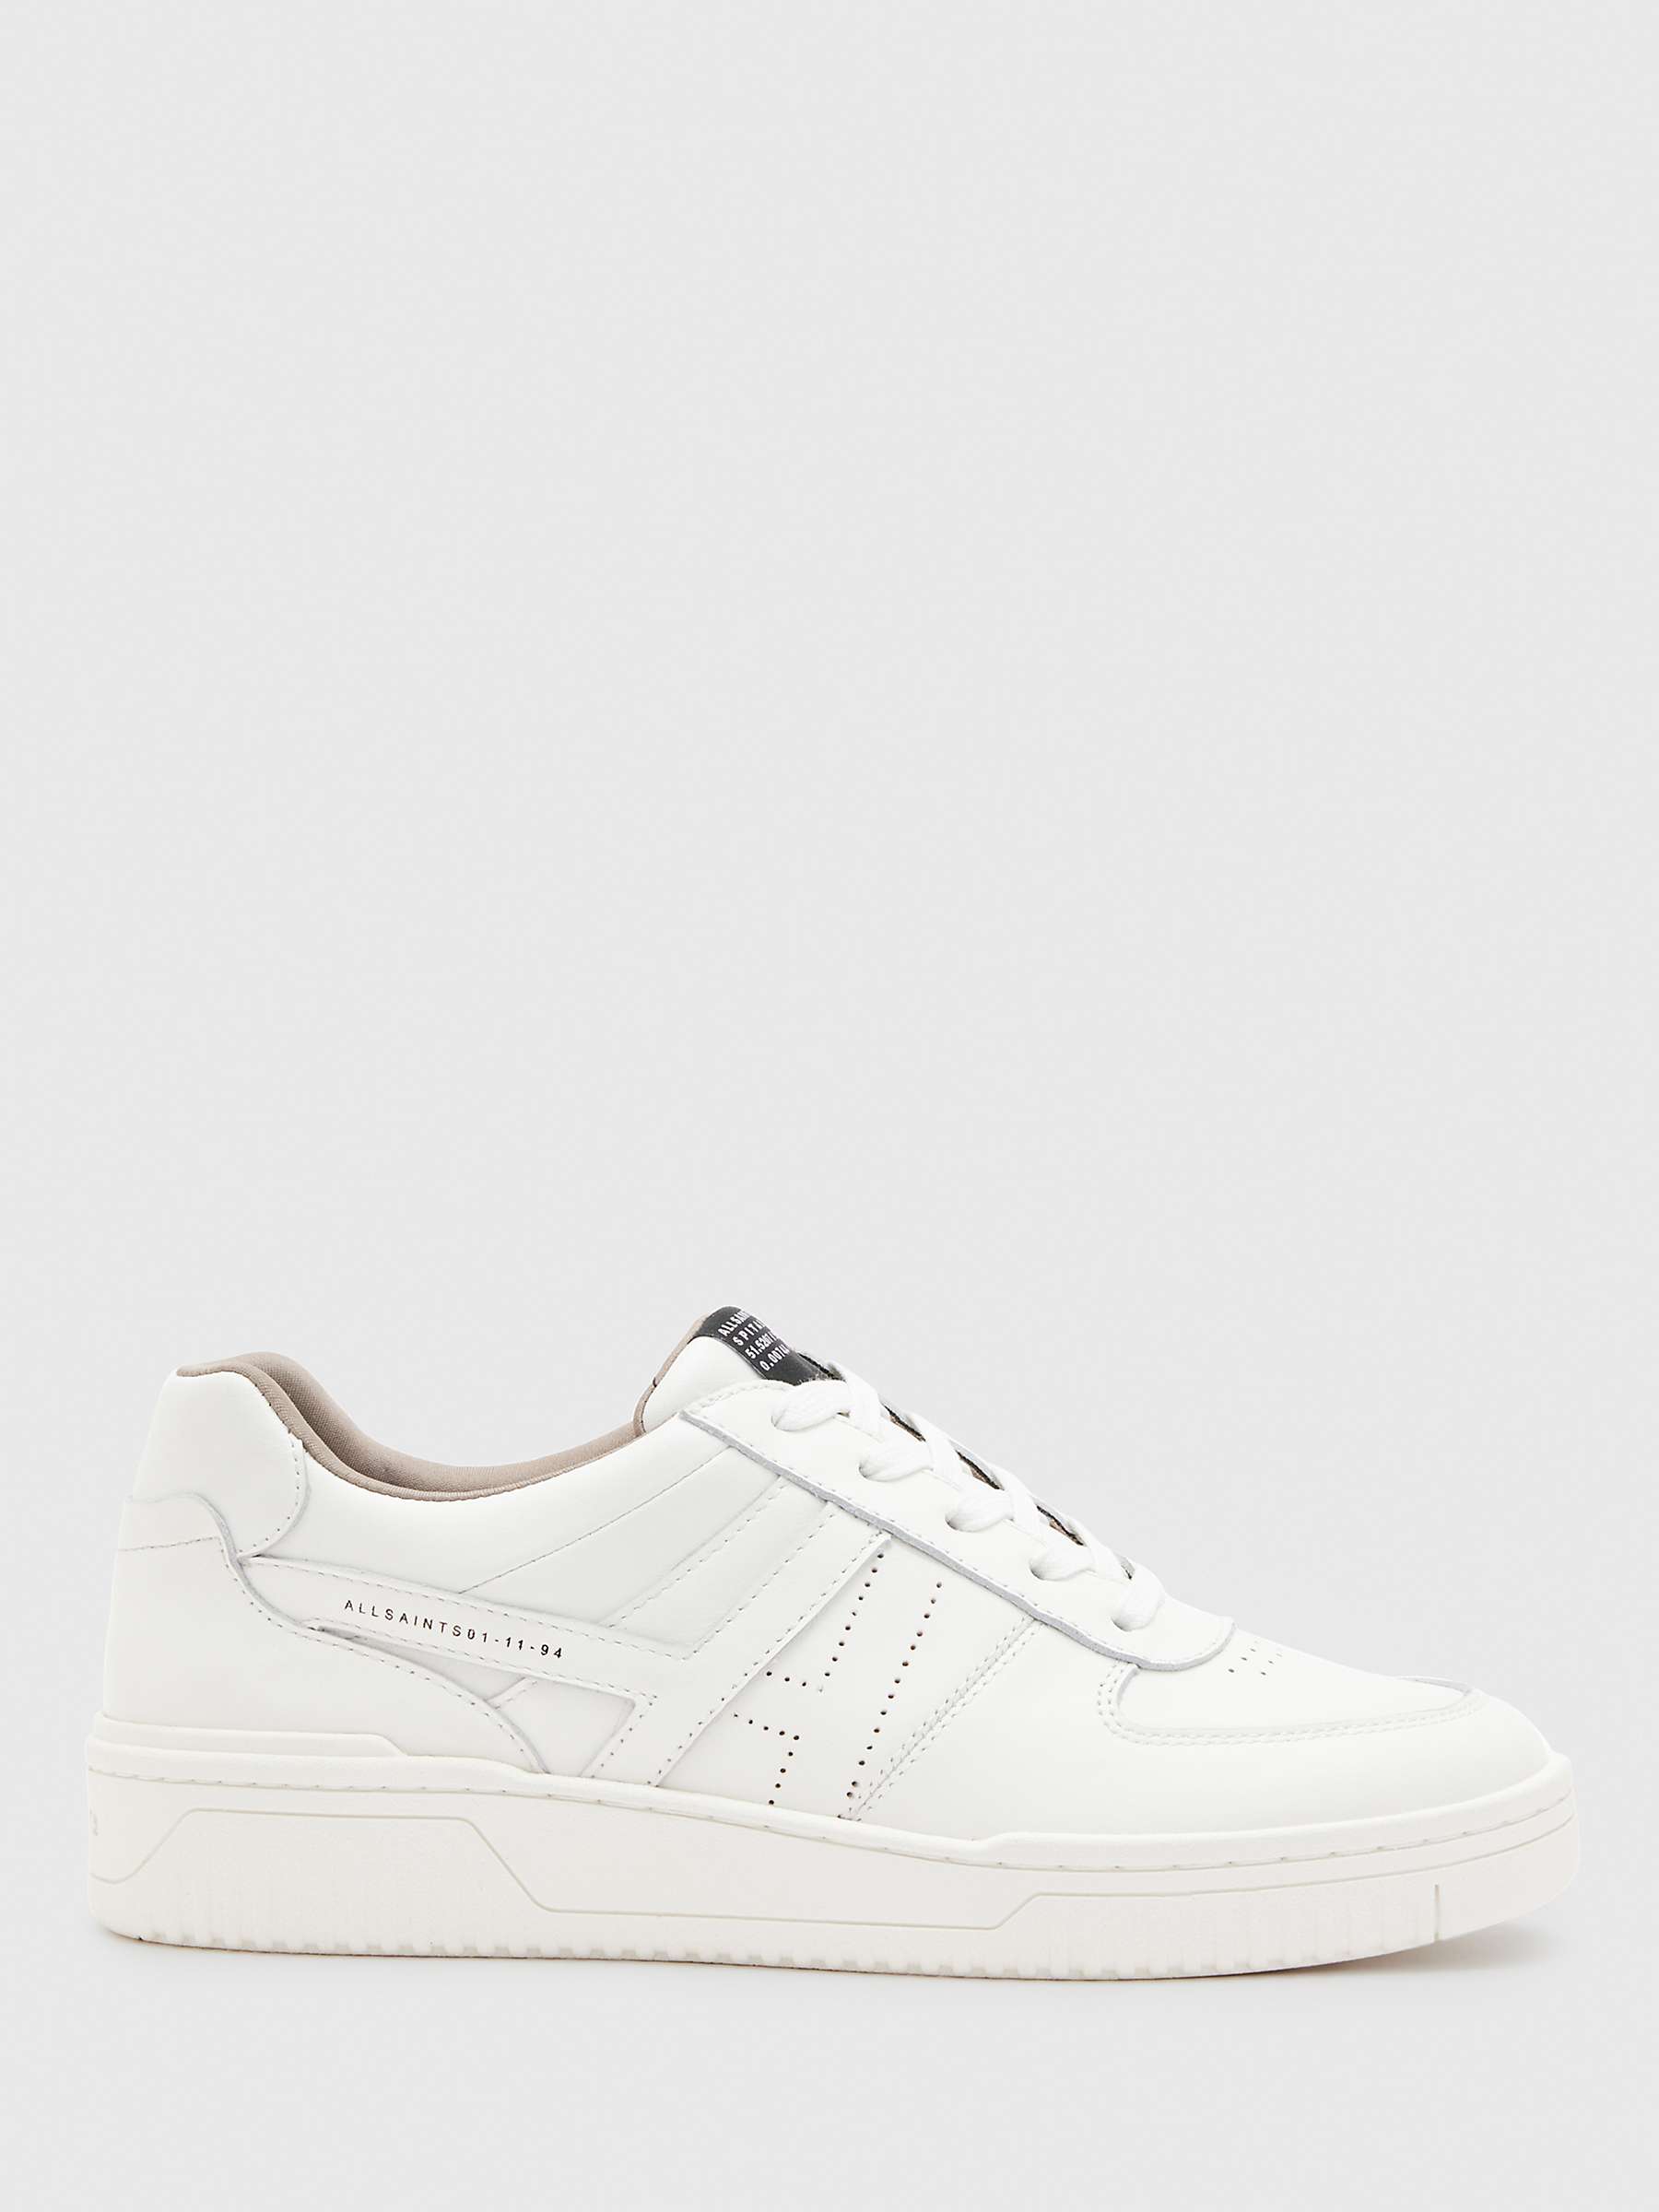 AllSaints Vix Low Top Leather Trainers, White at John Lewis & Partners